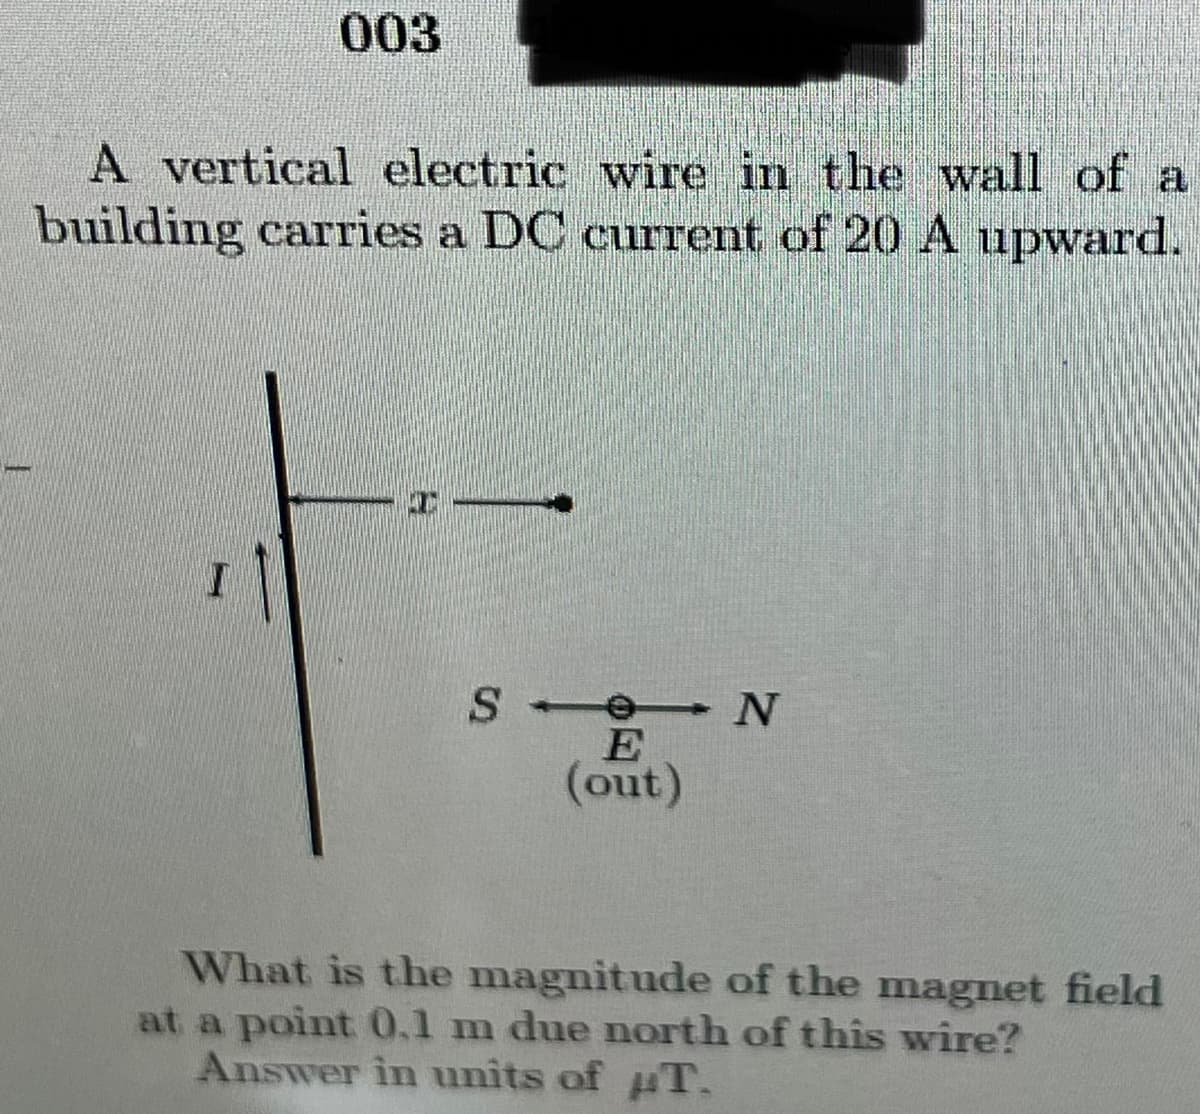 003
A vertical electric wire in the wall of a
building carries a DC current of 20 A upward.
E
(out)
What is the magnitude of the magnet field
at a point 0.1 m due north of this wire?
Answer in units of uT.
